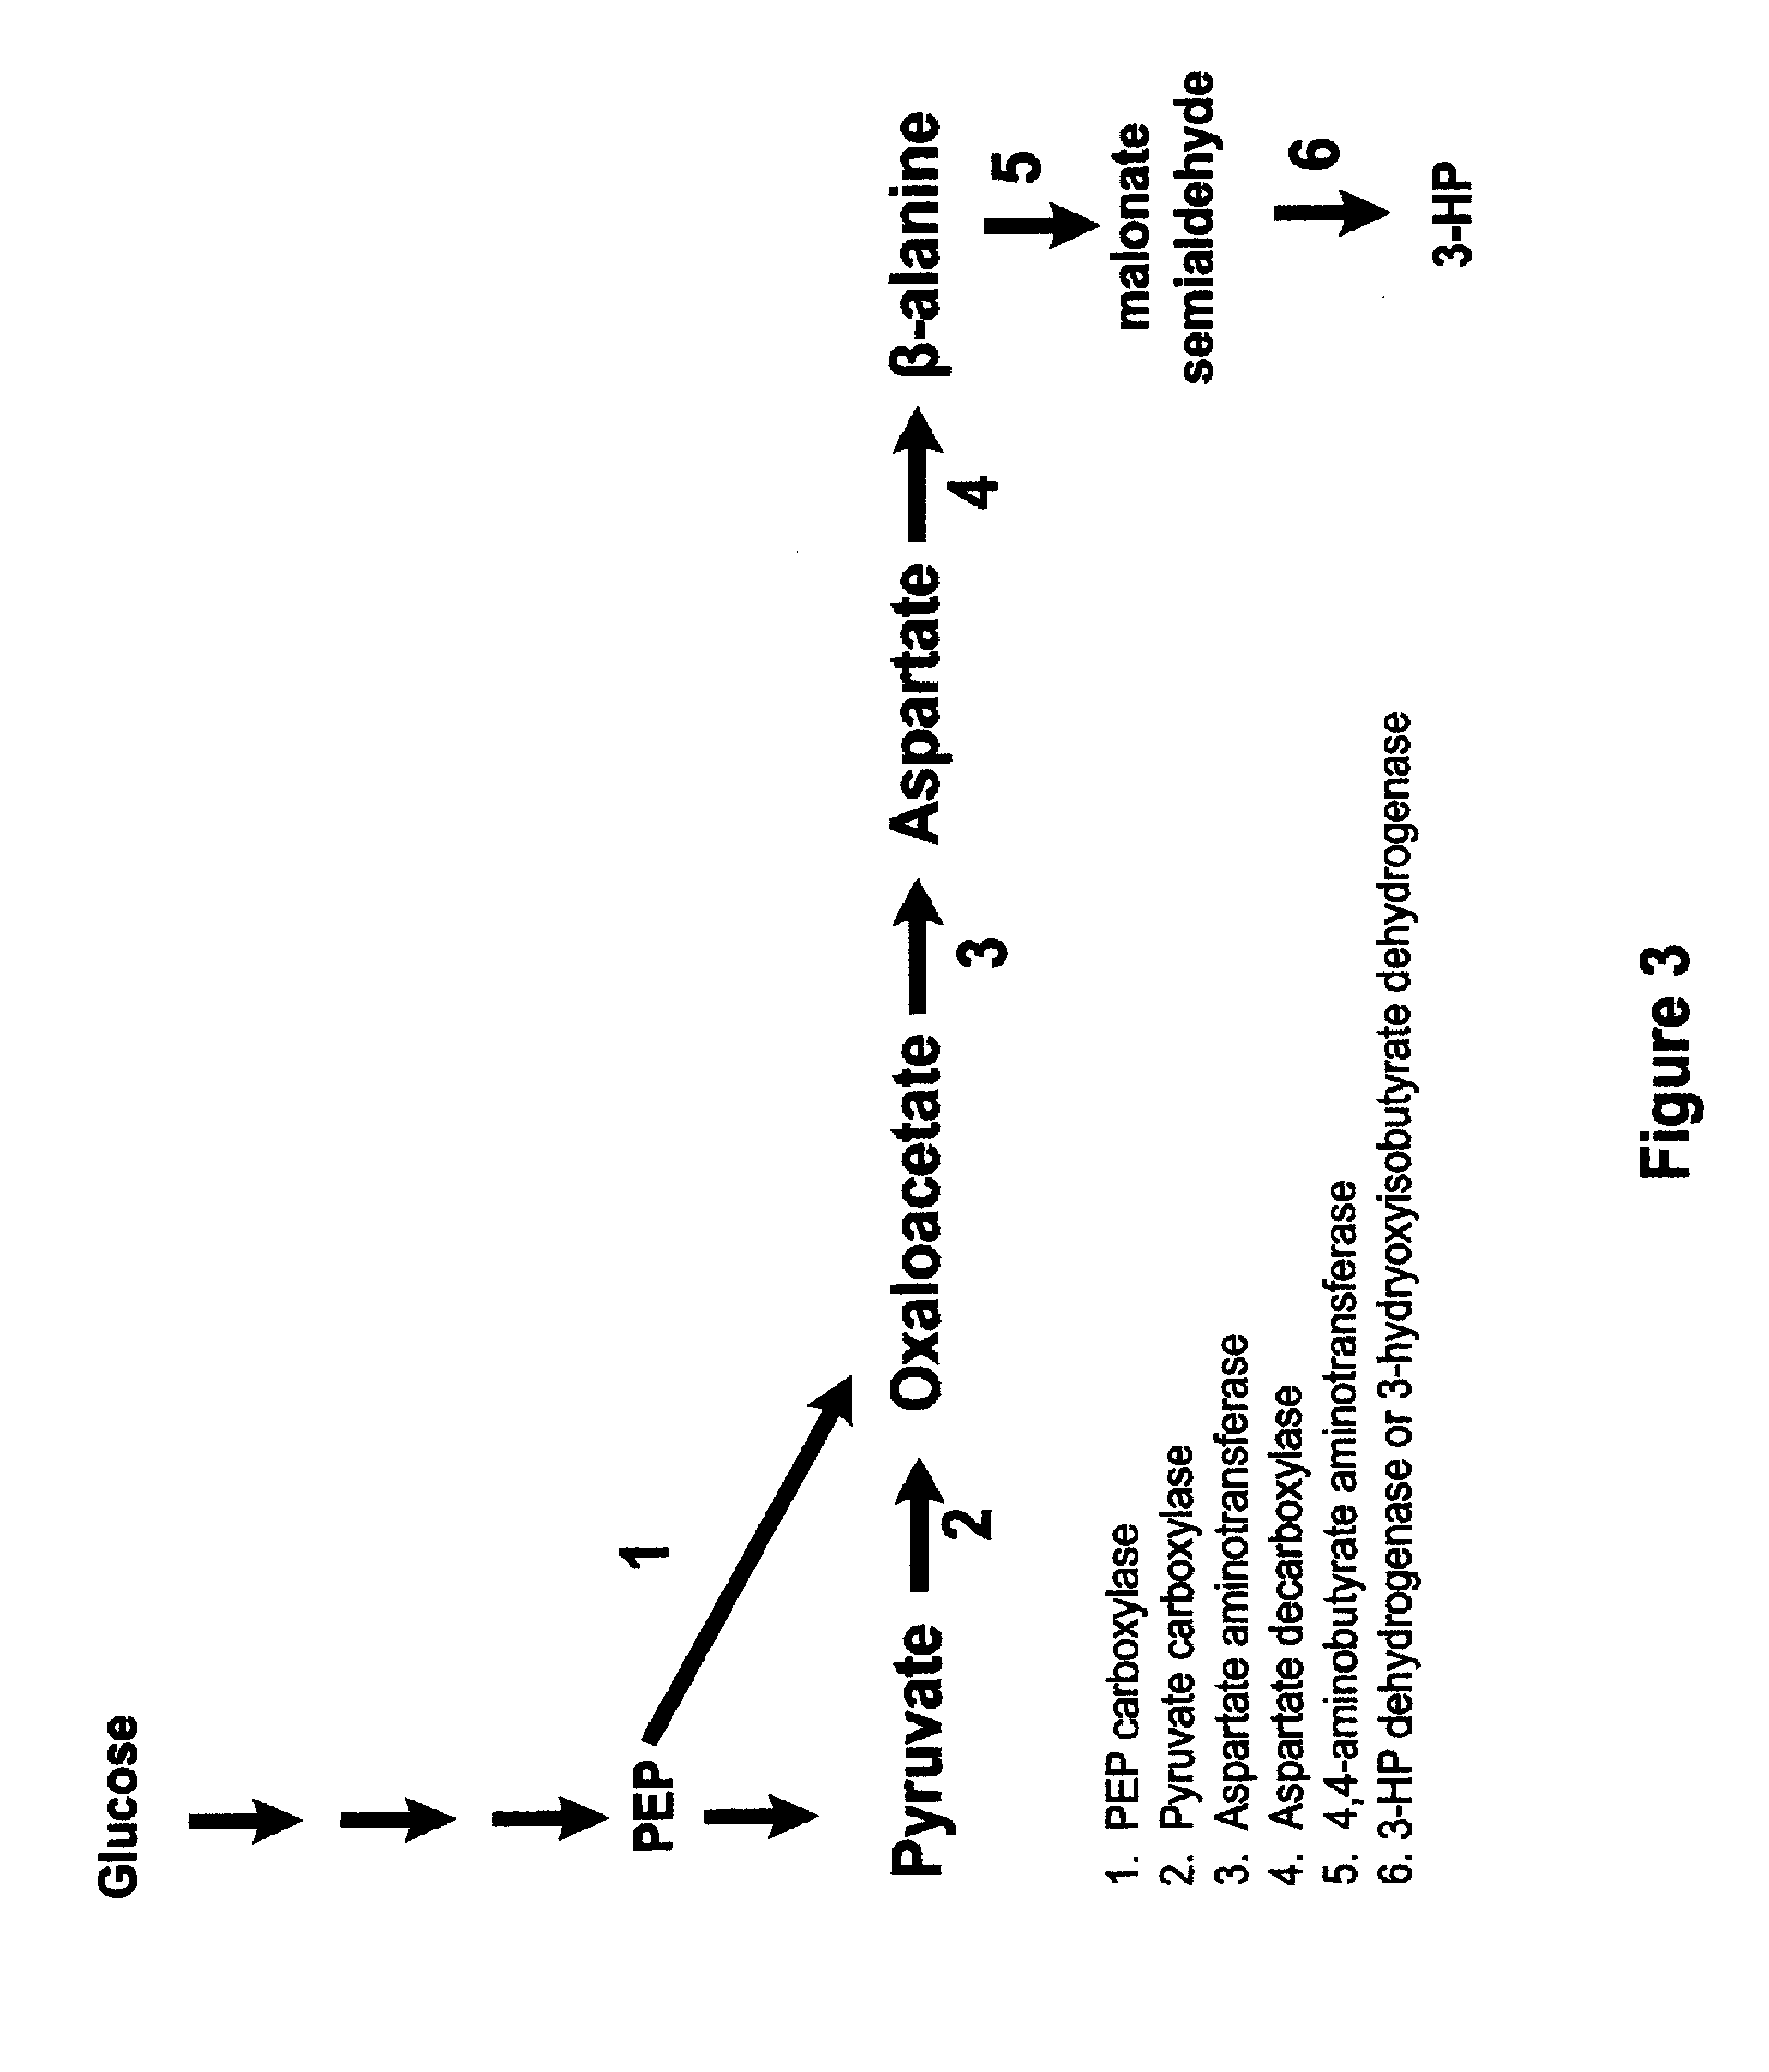 Methods, Systems And Compositions Related To Reduction Of Conversions Of Microbially Produced 3-Hydroxyproplonic Acid (3-HP) To Aldehyde Metabolites